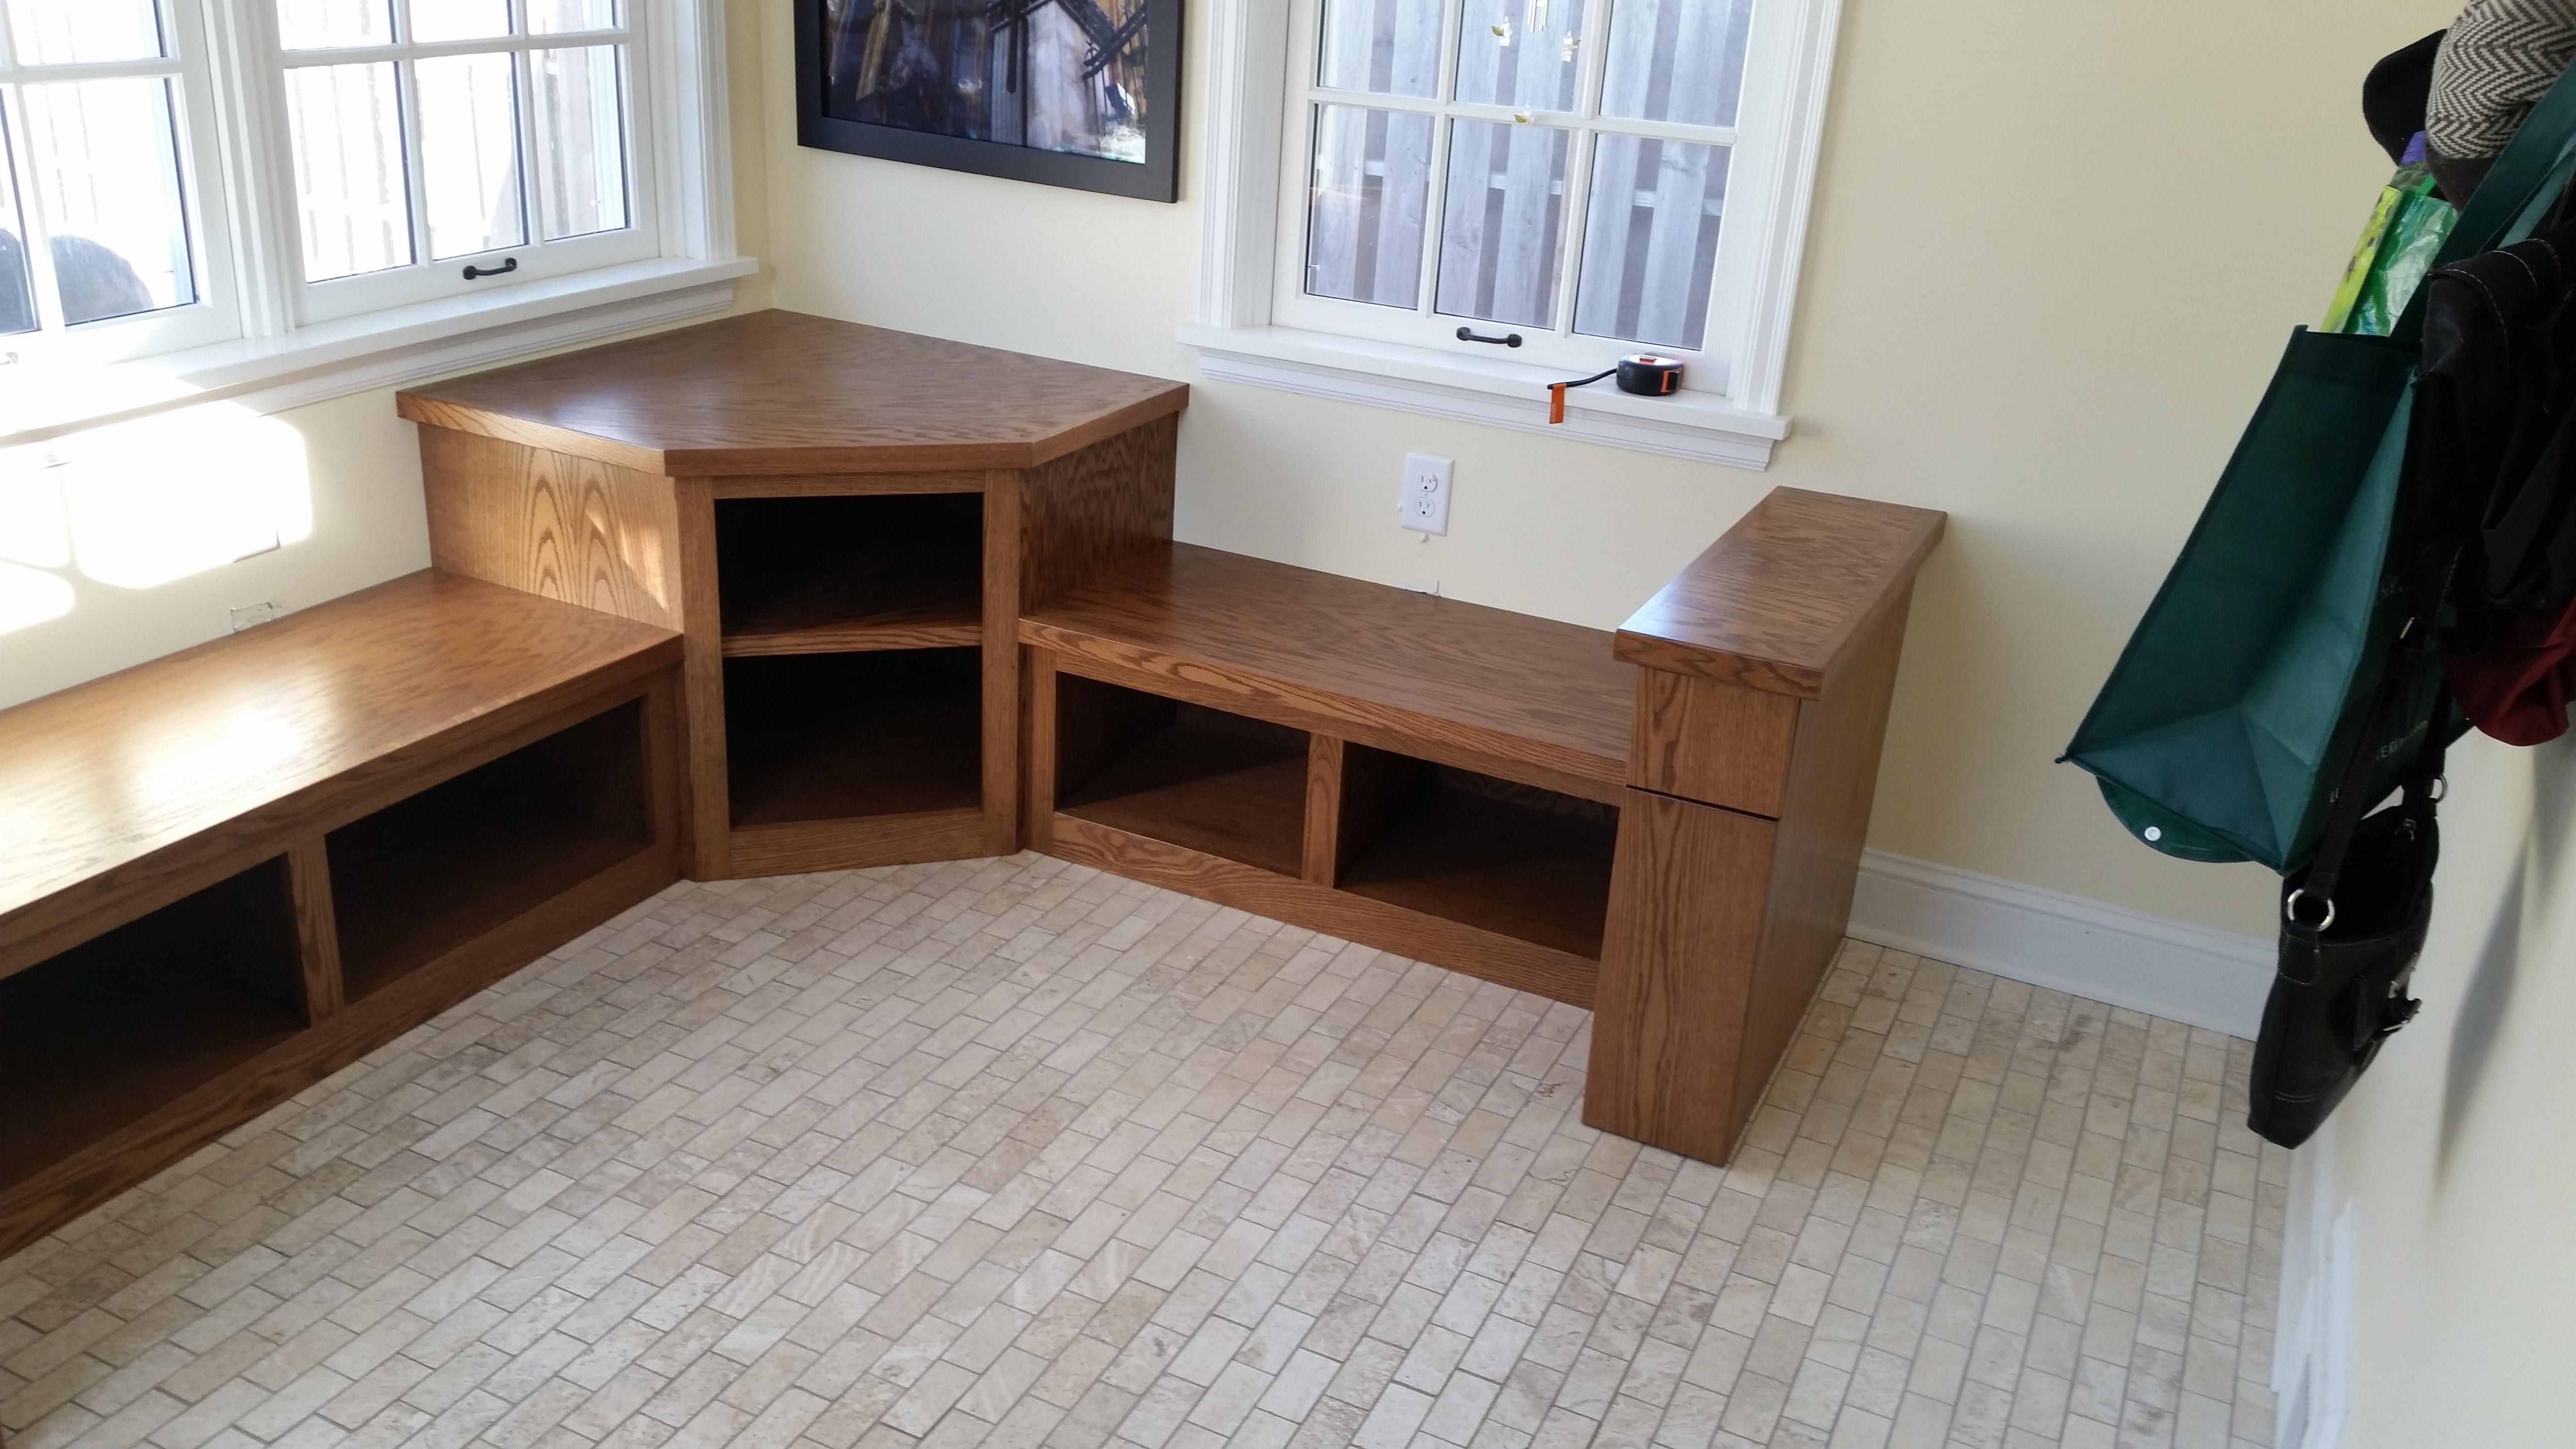 https://valleycustomcabinets.com/wp-content/uploads/2017/02/Custom-Bench-Cabinets-Mpls-MN-Benches-Window-Seats-Valley-Custom-Cabinets-Elements-Principles.jpg